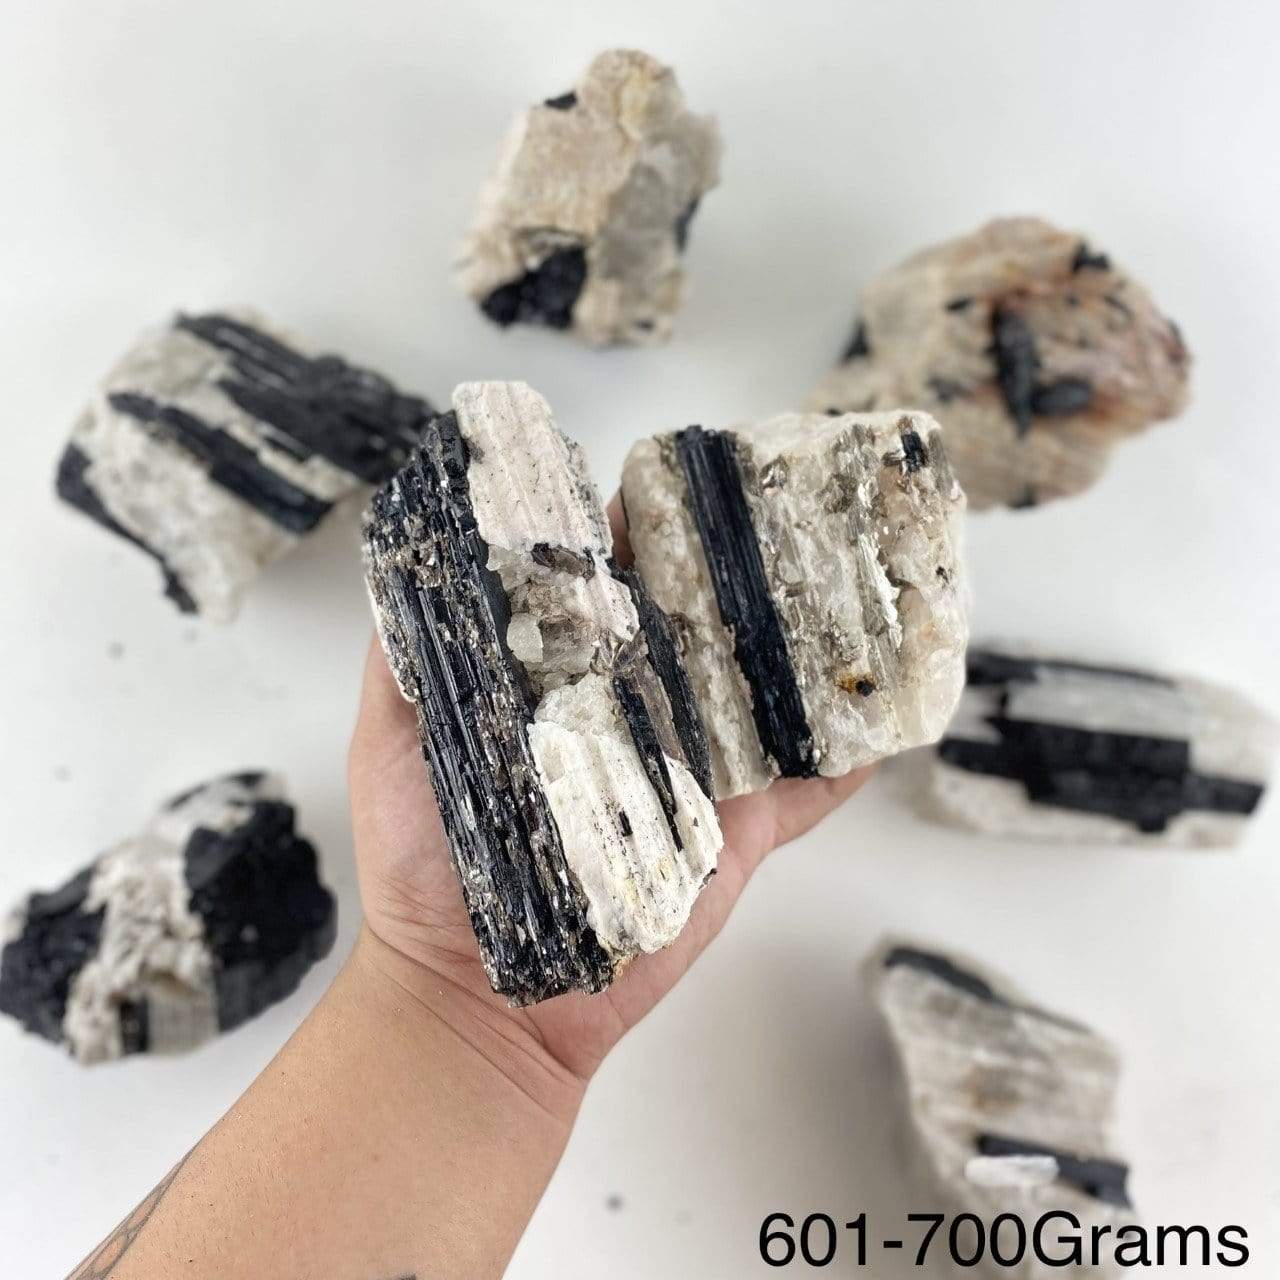 black tourmaline on matrix displayed in hand size is for 601-700 grams